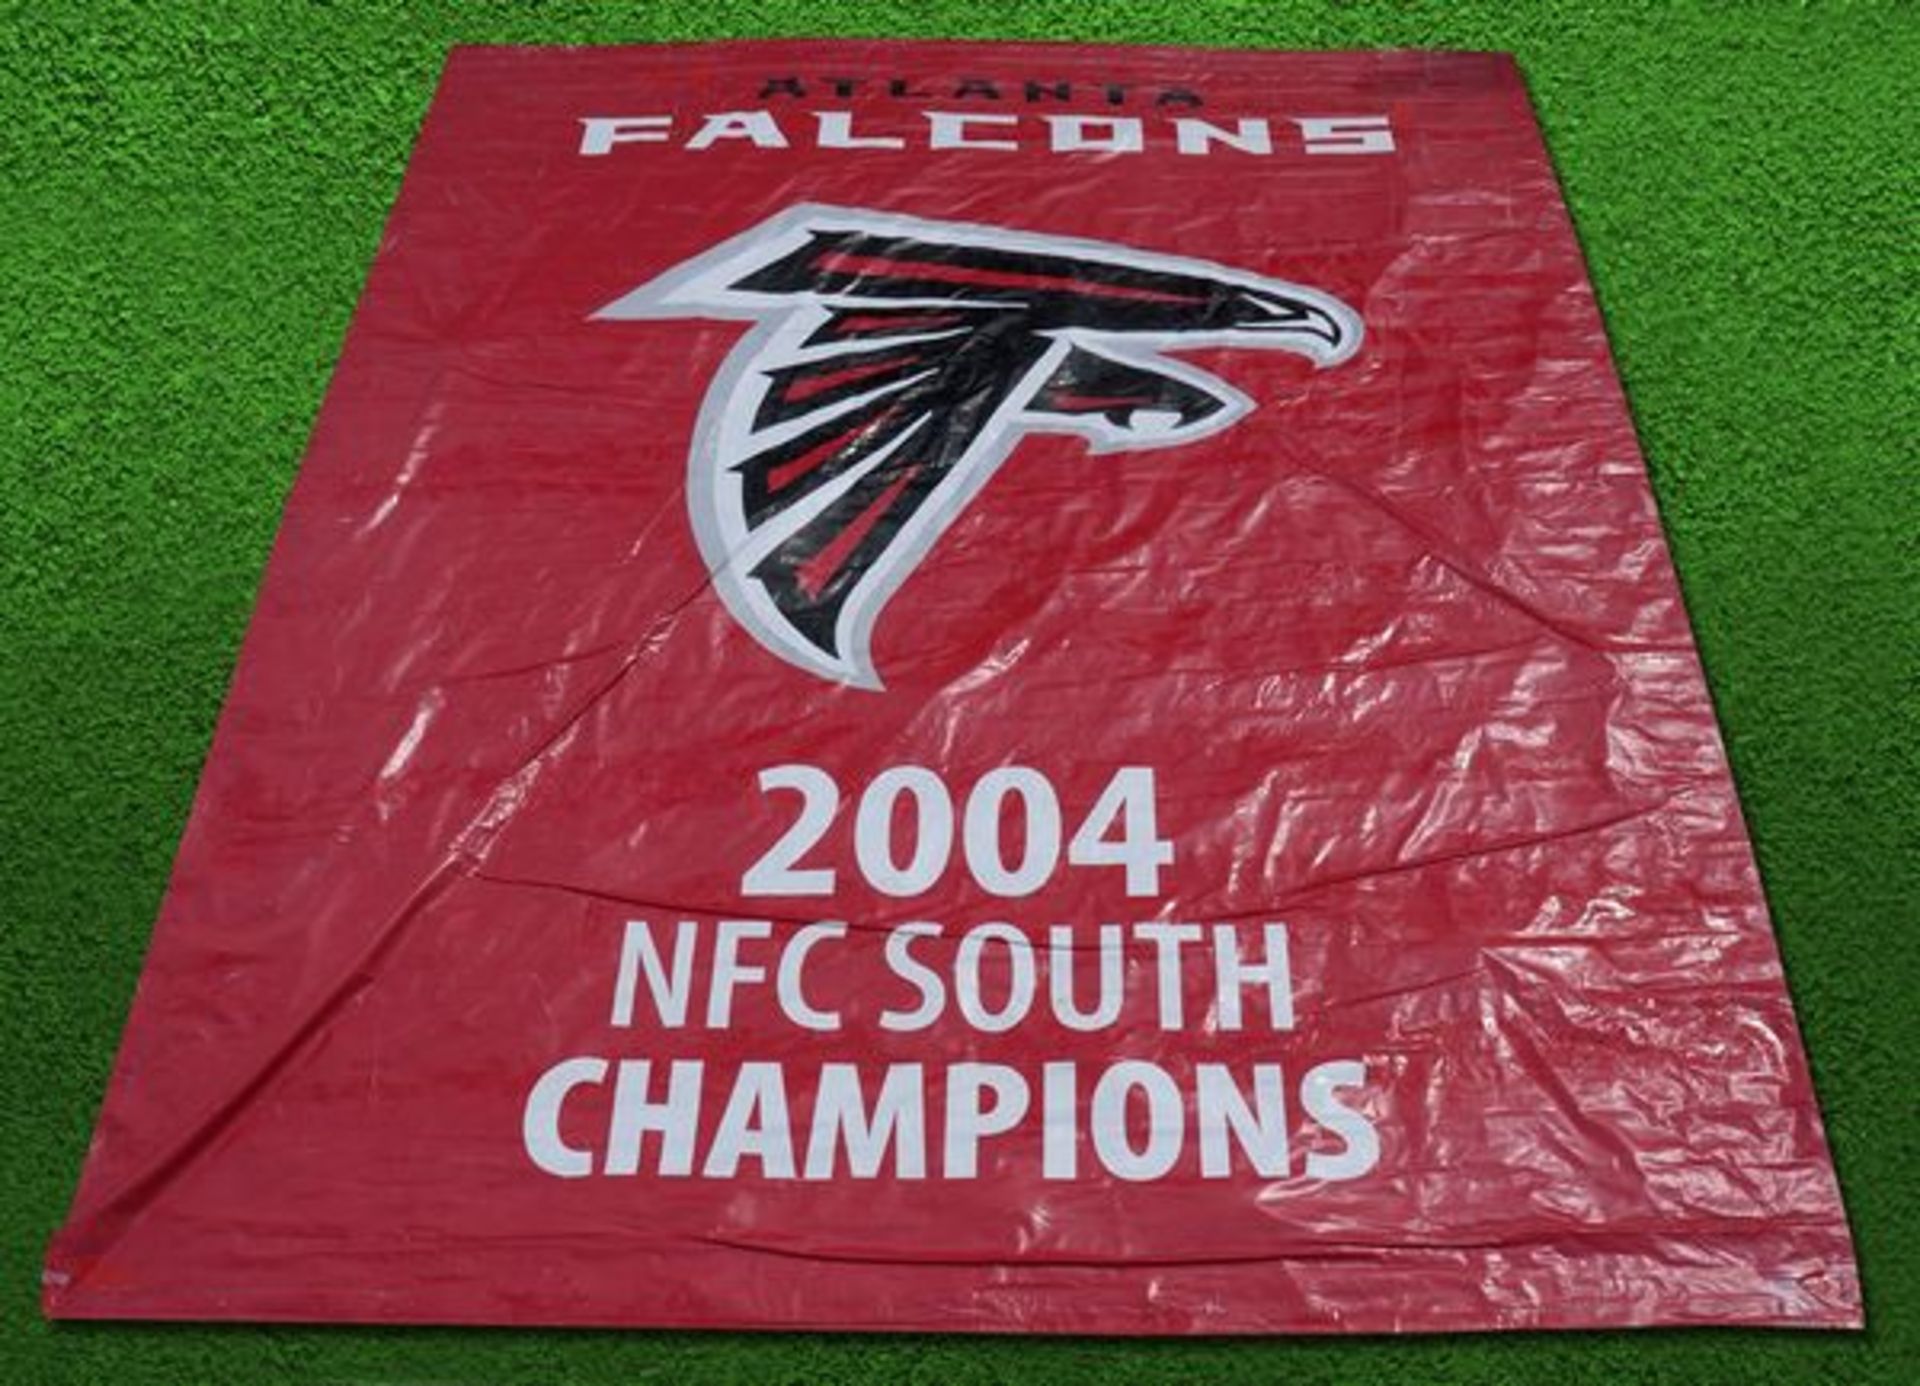 2004 NFC SOUTH, FALCONS CHAMPIONS BANNER / Authentic & Historic Banner Hung in GA Dome Rafters /